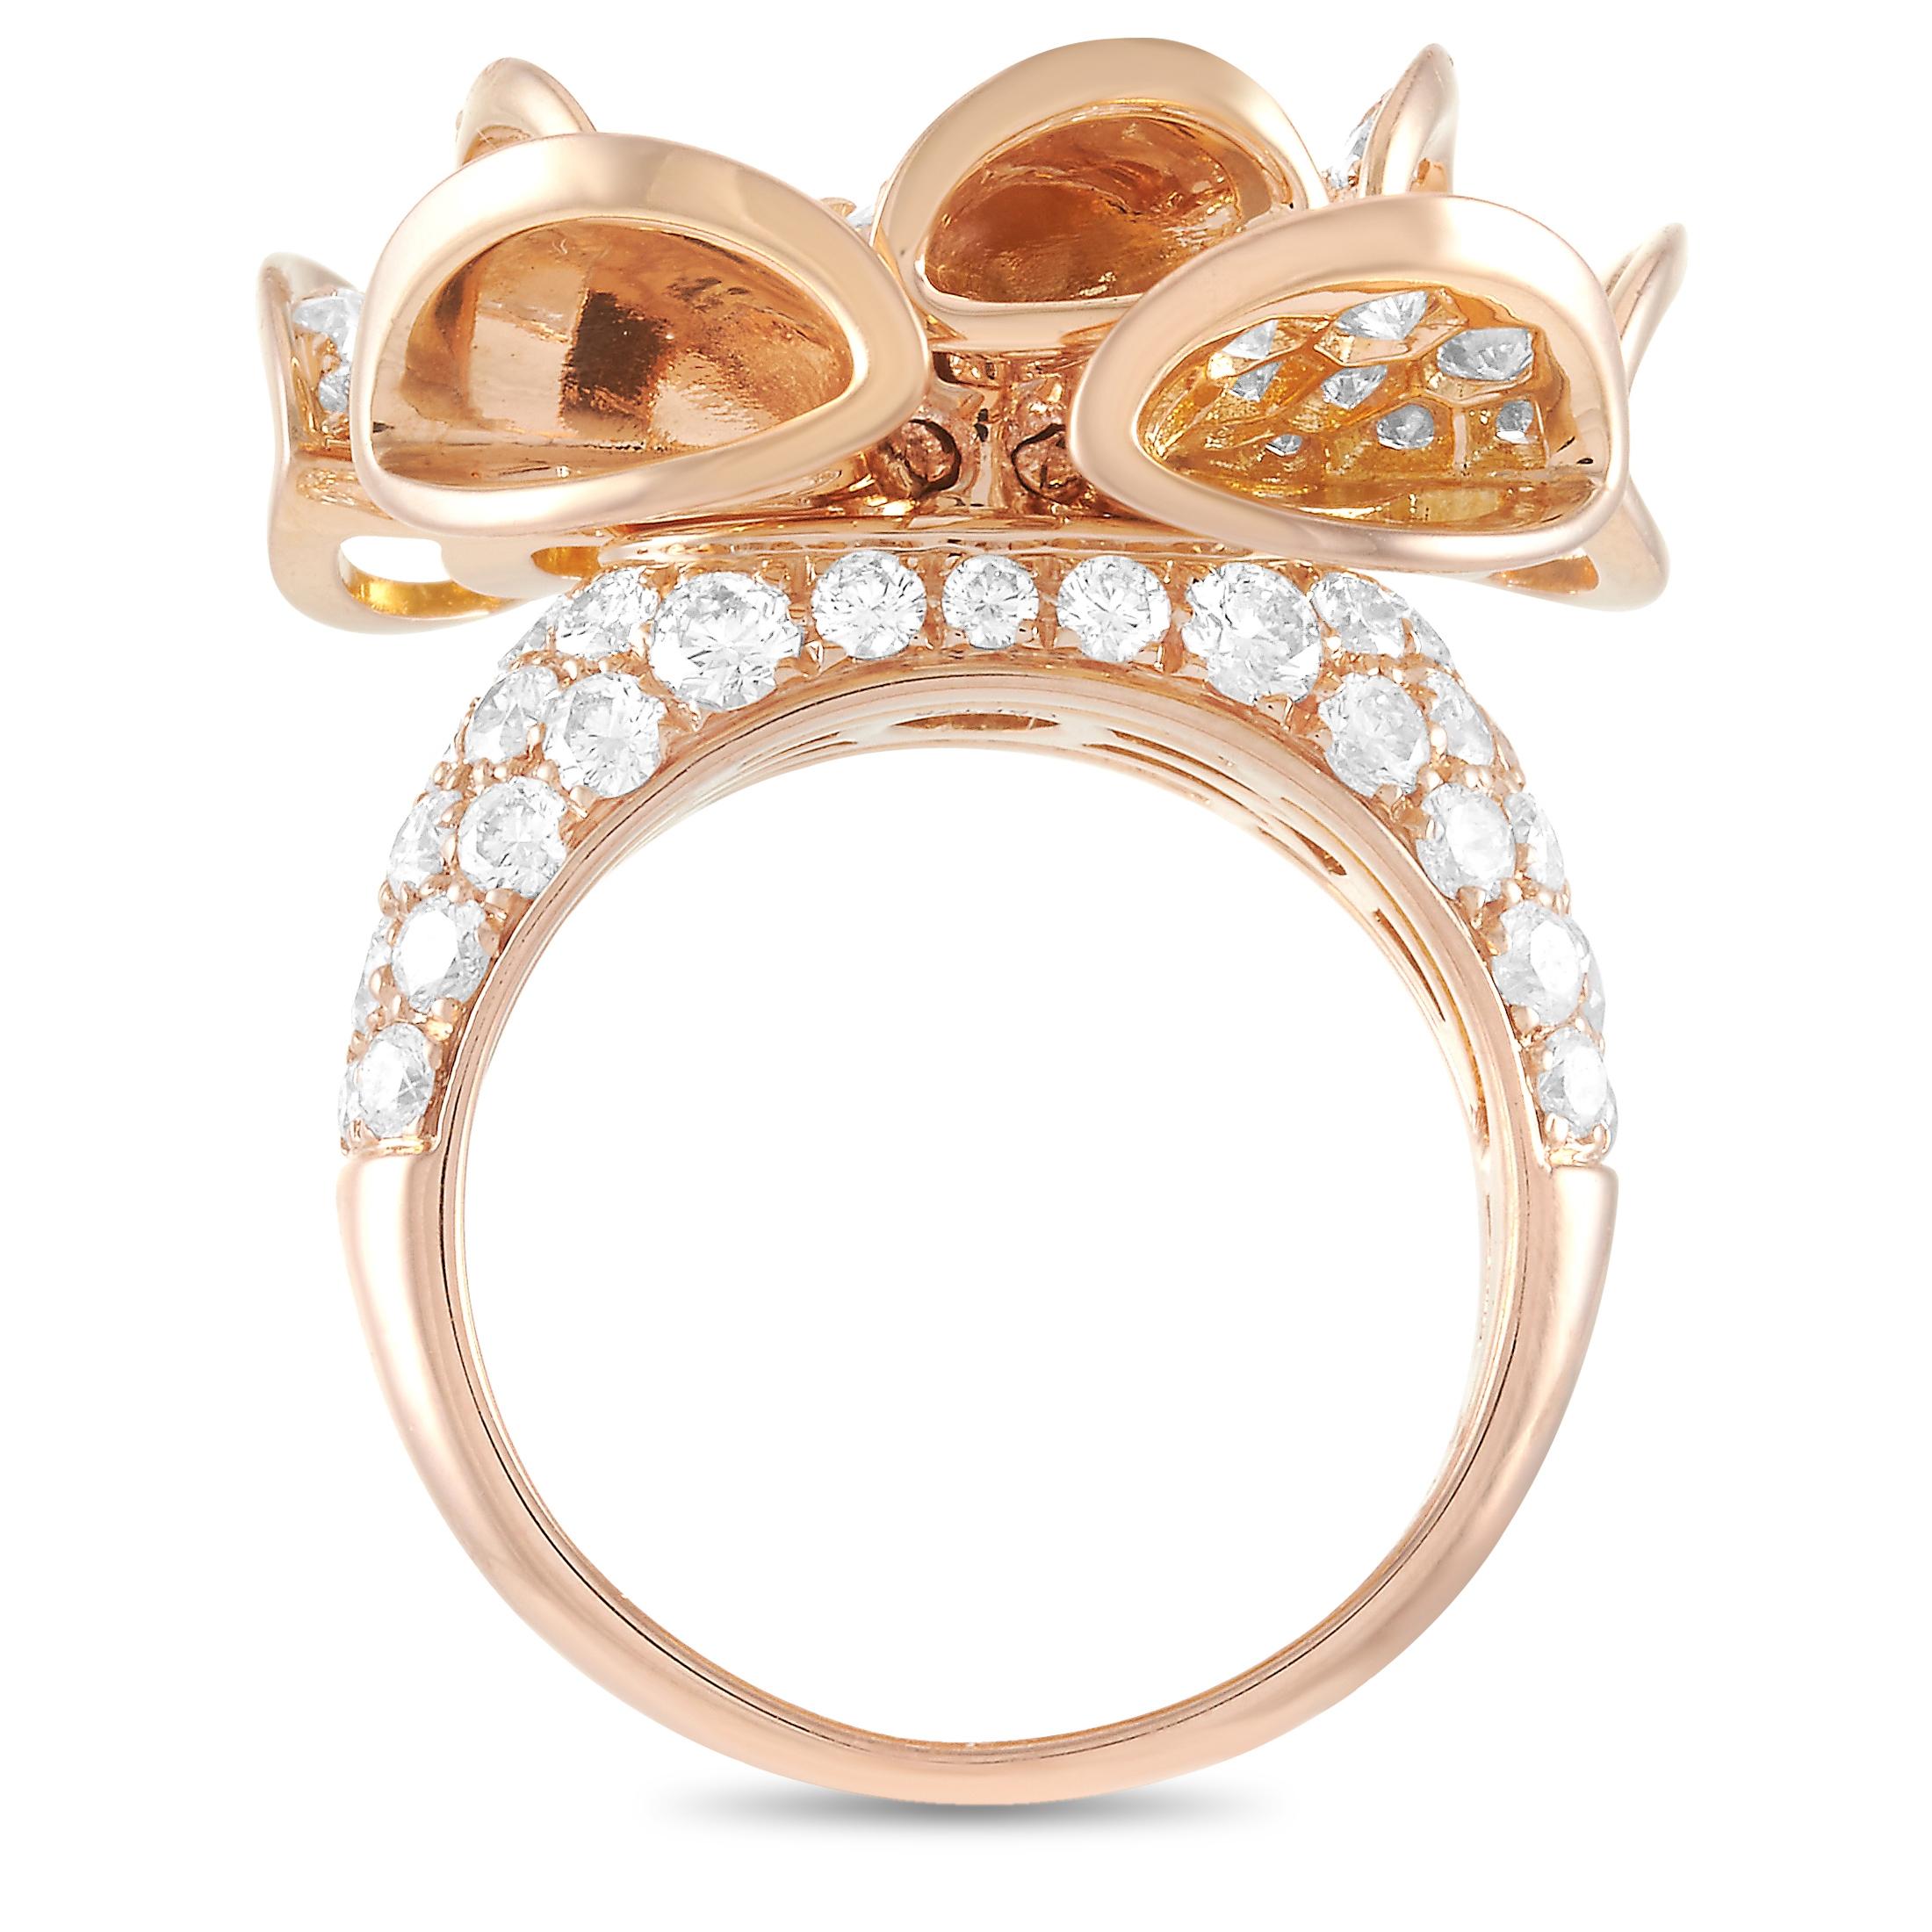 The Bvlgari “Divas' Dream” ring is crafted from 18K rose gold and weighs 13.7 grams. It boasts band thickness of 4 mm and top height of 9 mm, while top dimensions measure 20 by 20 mm. The ring is set with diamonds that feature F color and VVS